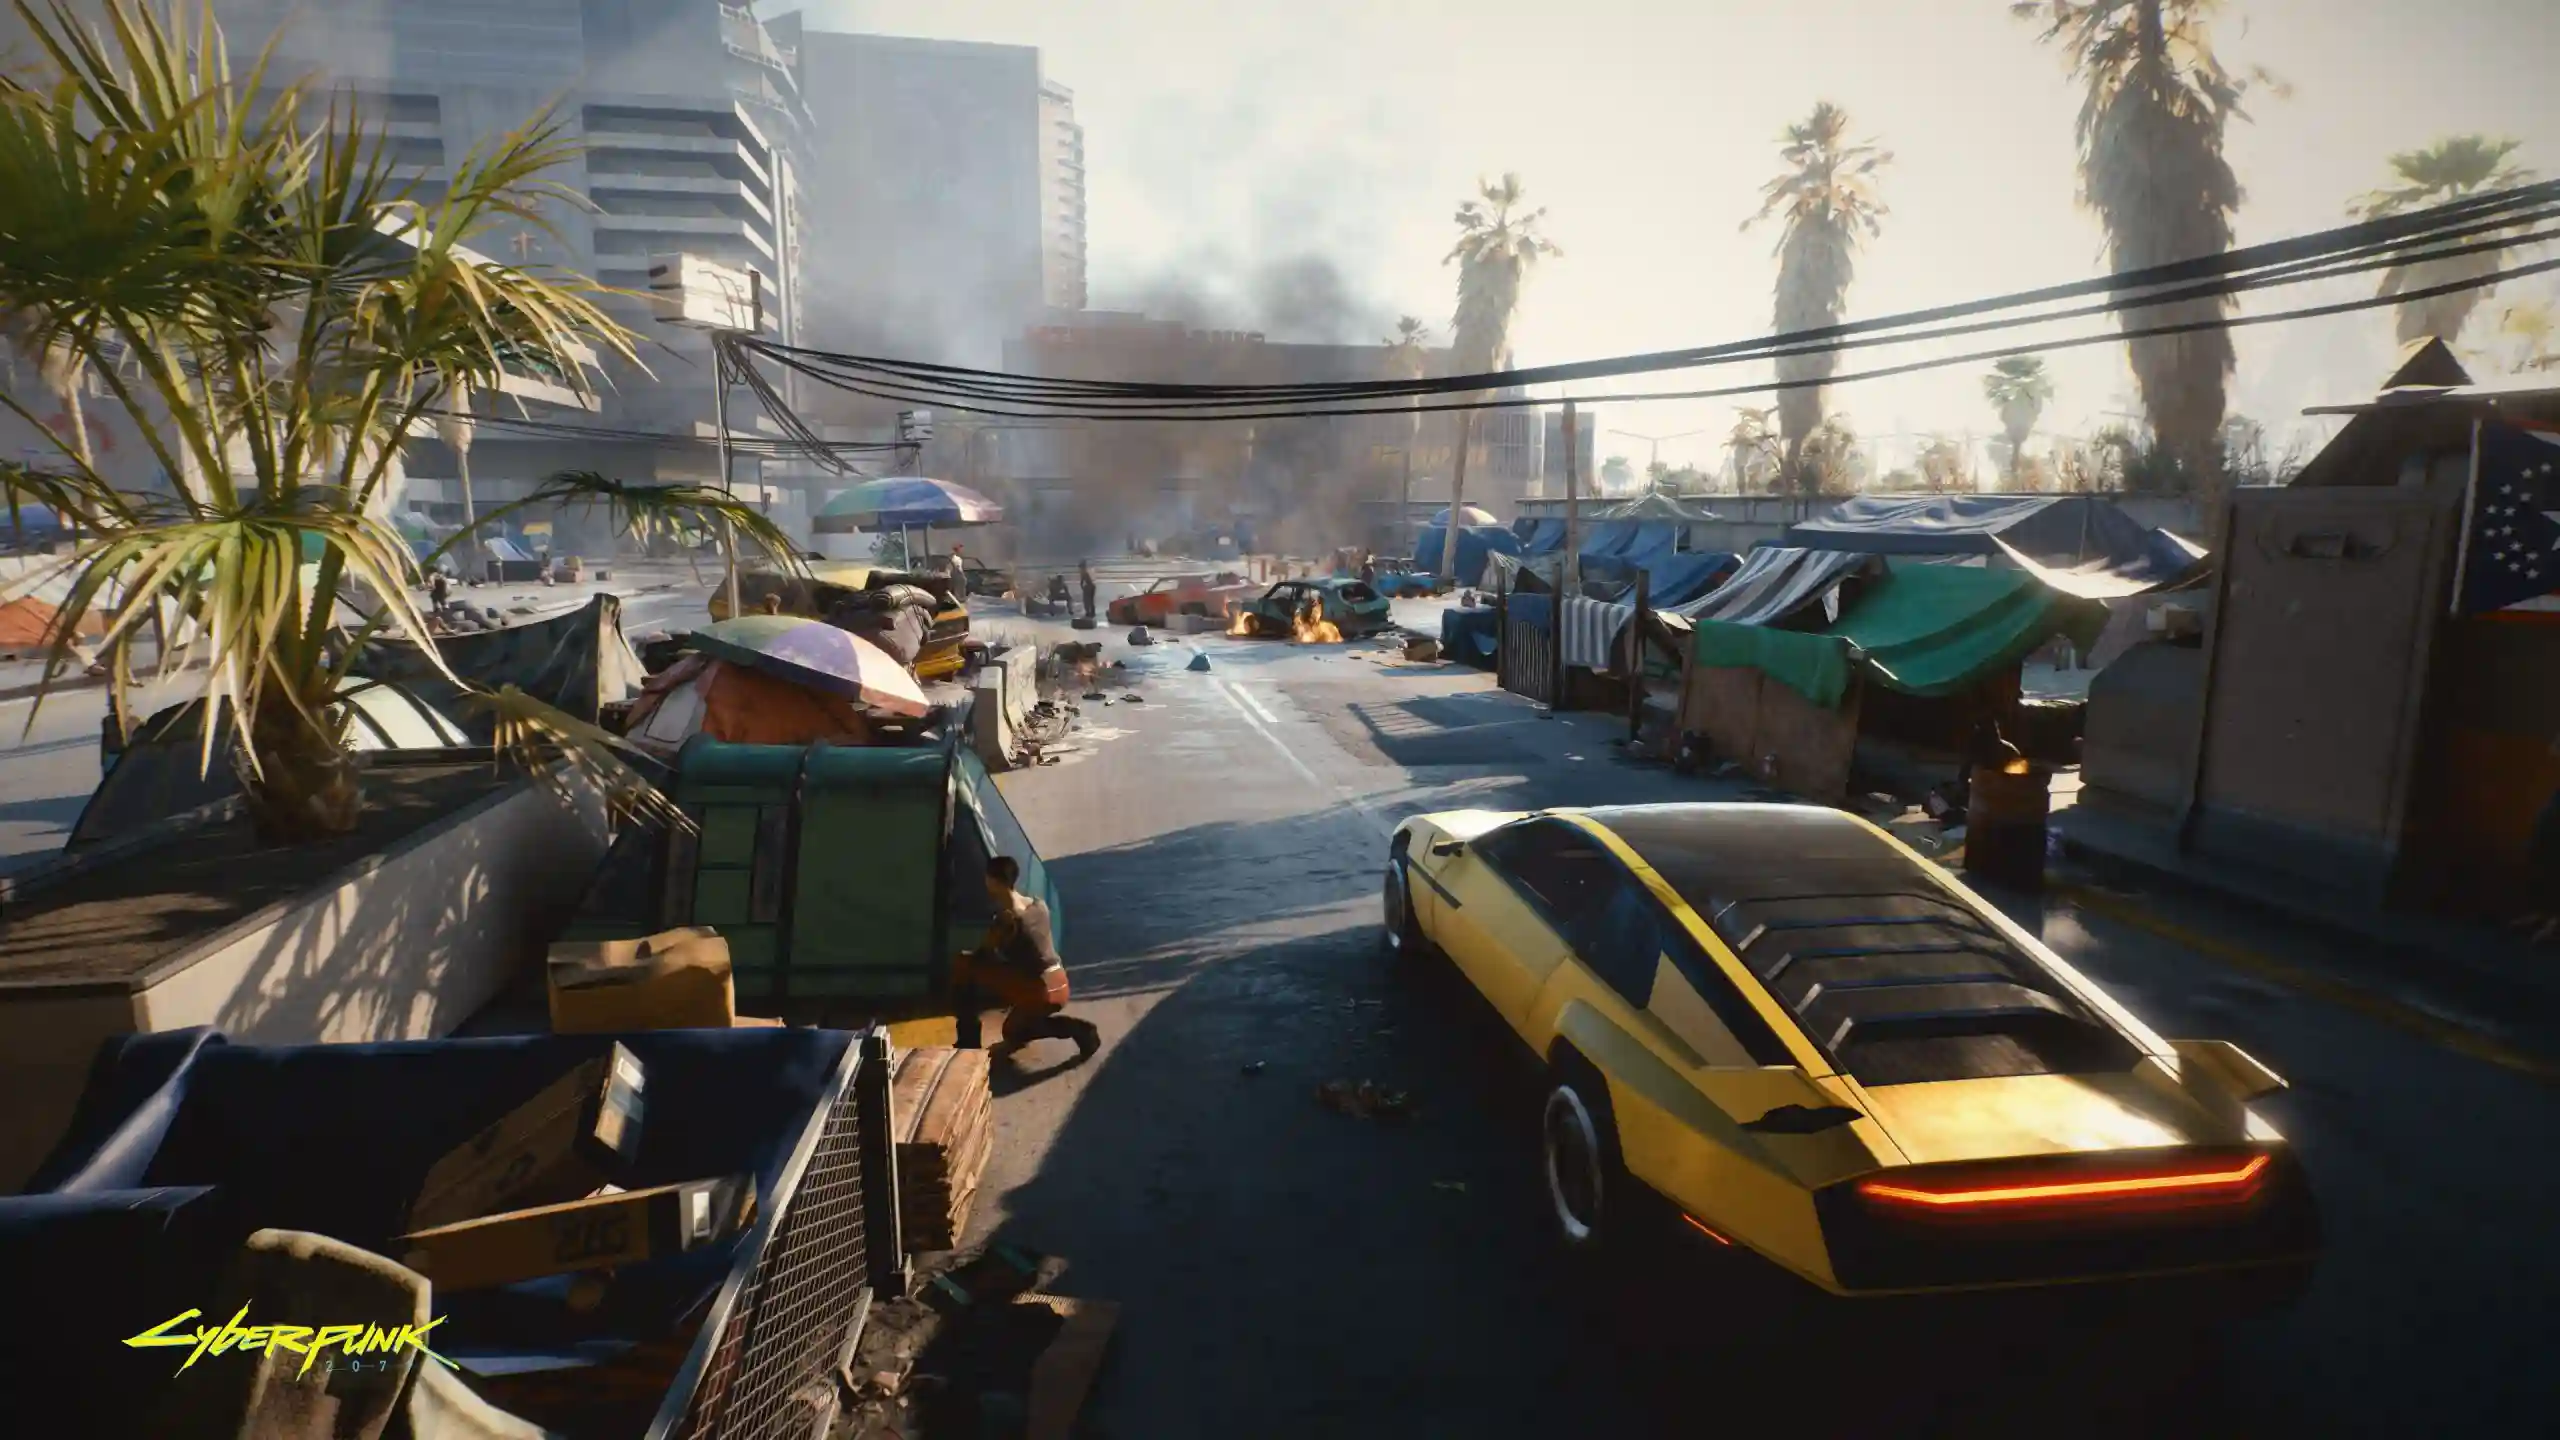 Cyberpunk 2077 Won’t Require 200 GB of Space